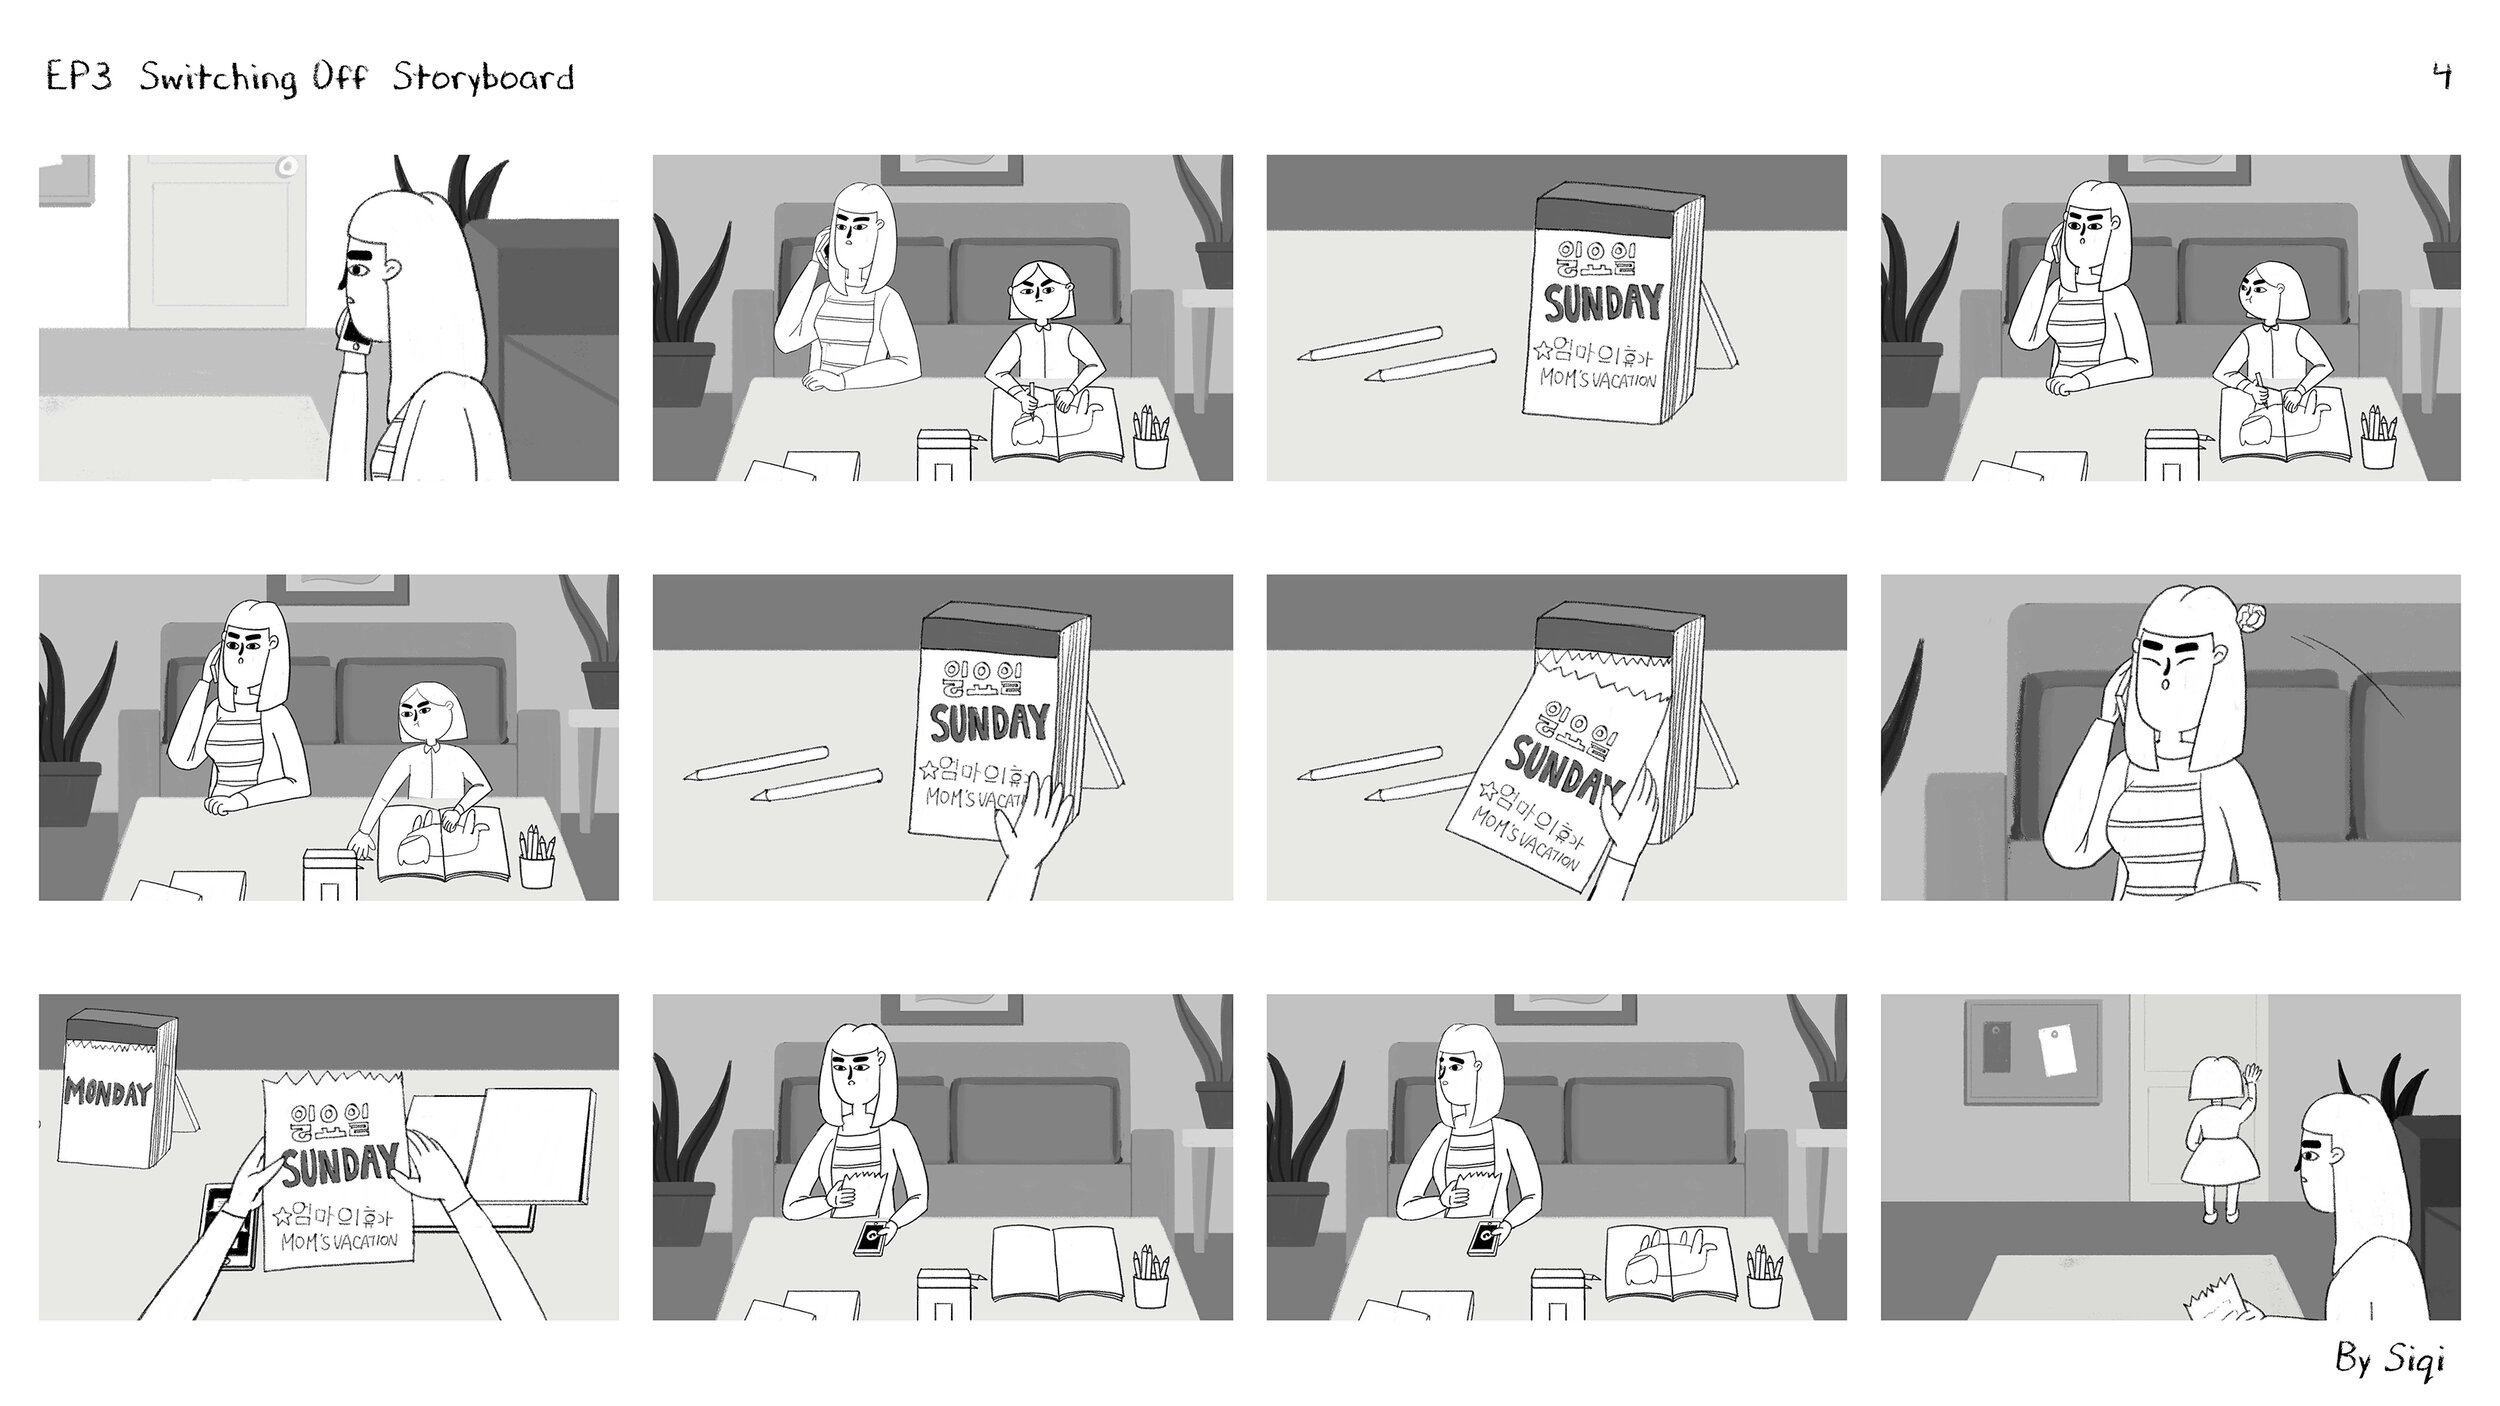 EP3_Switching Off_Storyboard_Page_4.jpg